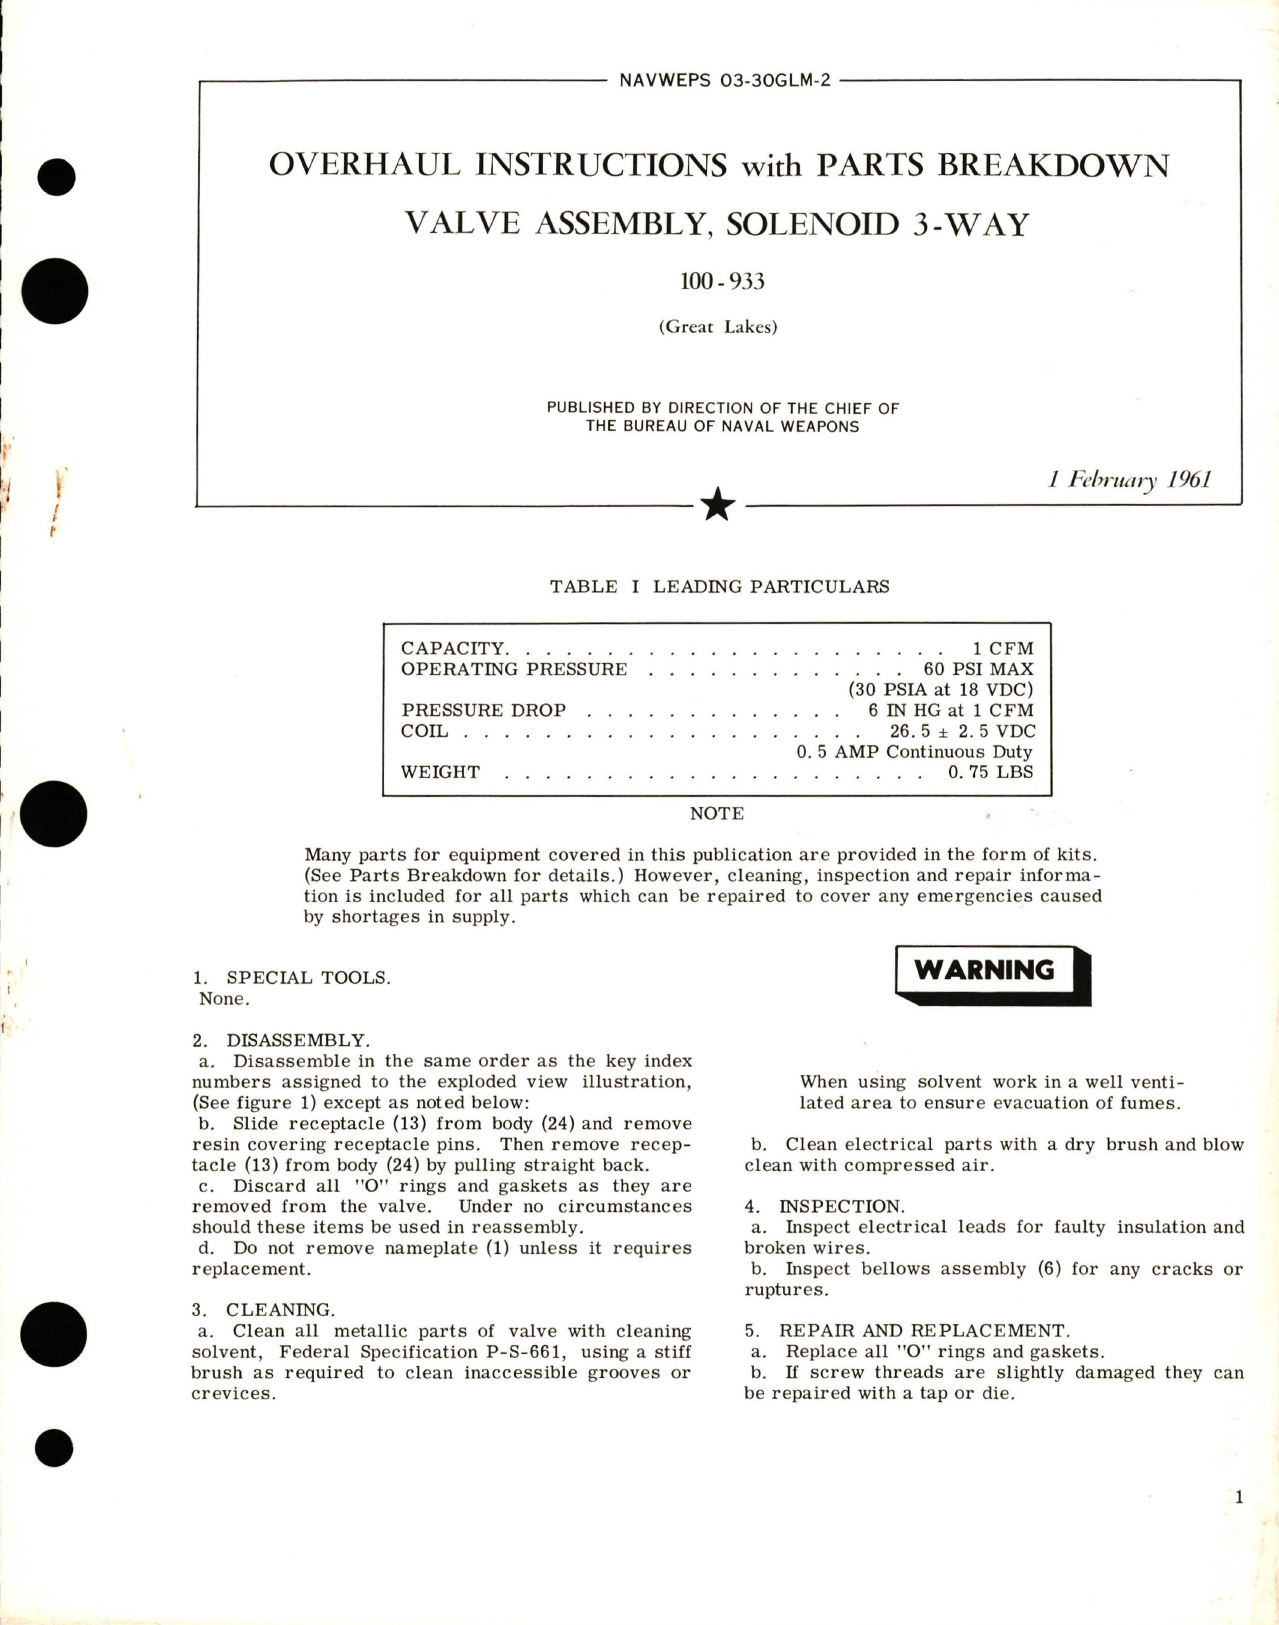 Sample page 1 from AirCorps Library document: Overhaul Instructions with Parts Breakdown for 3-Way Solenoid Valve Assembly - 100-933